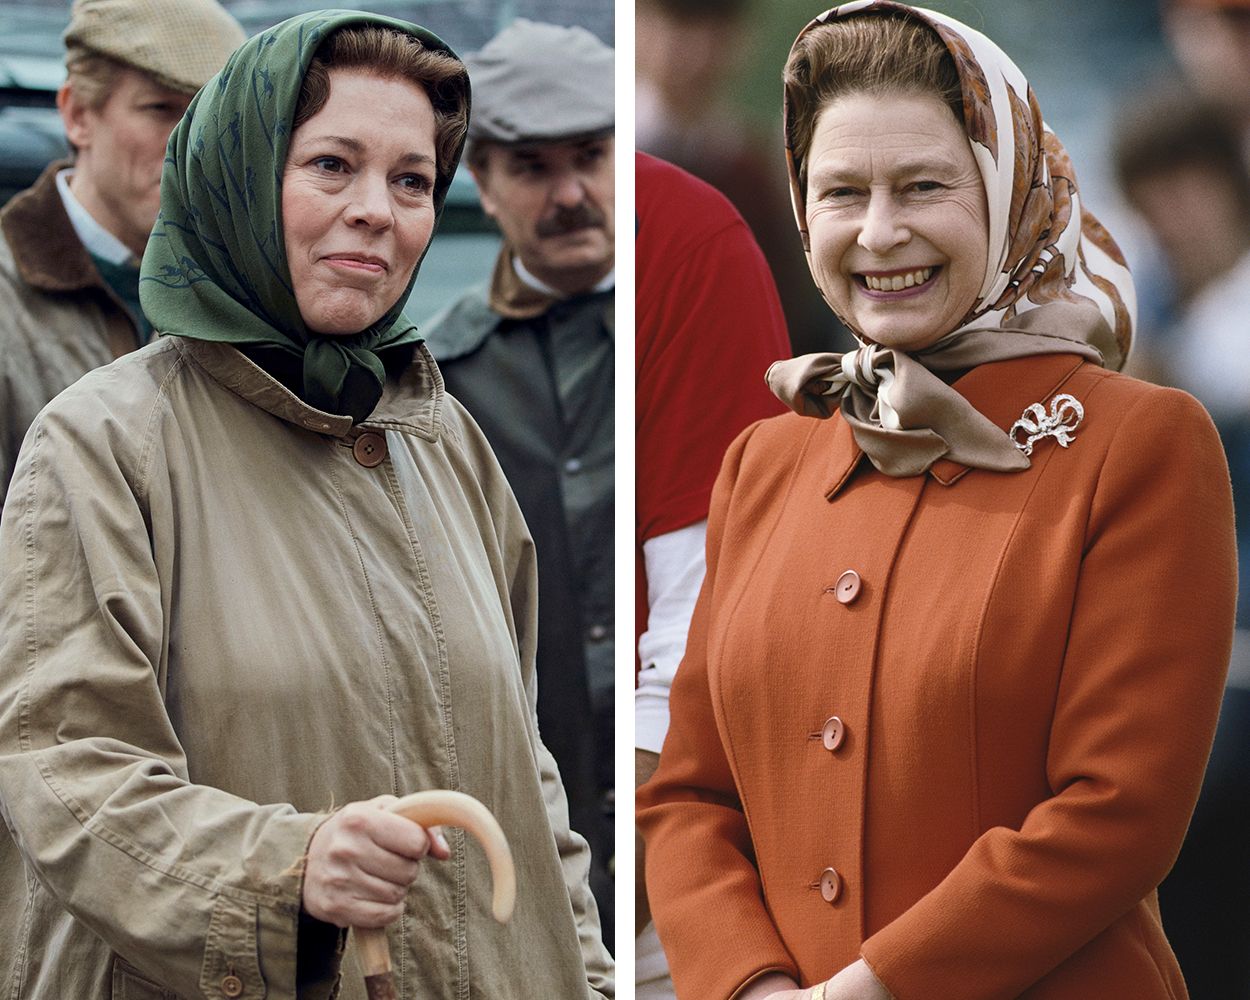 See The Cast Of The Crown Vs The People They Play In Real Life